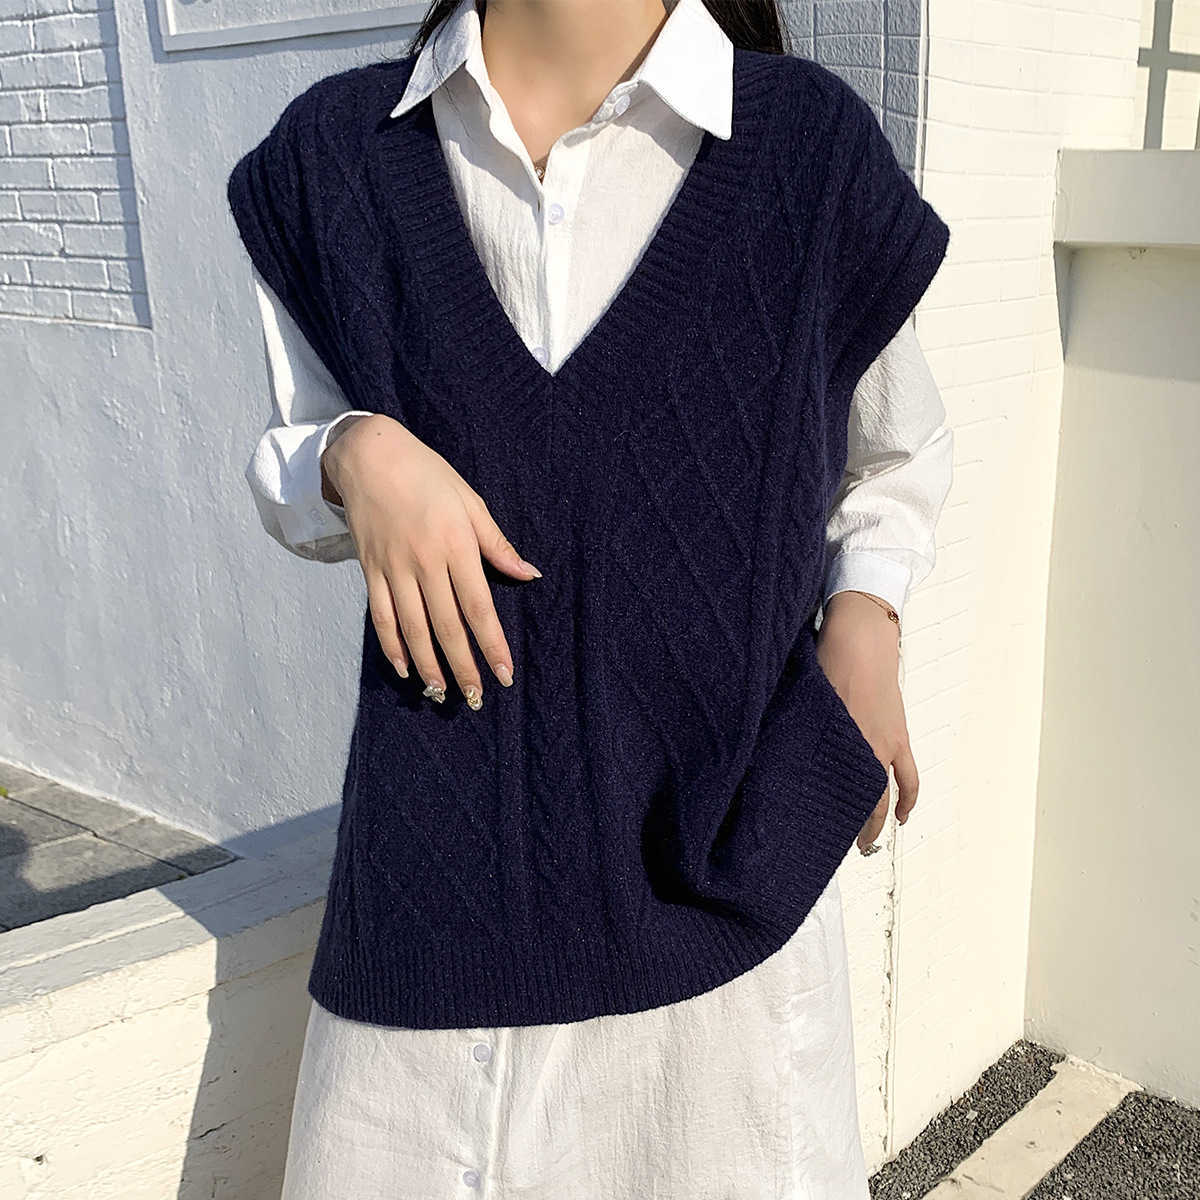 

Women Fashion Oversized Knitted Vest Sweater Vintage Sleeveless Side Vents Female Waistcoat Chic Tops 210607, Blue